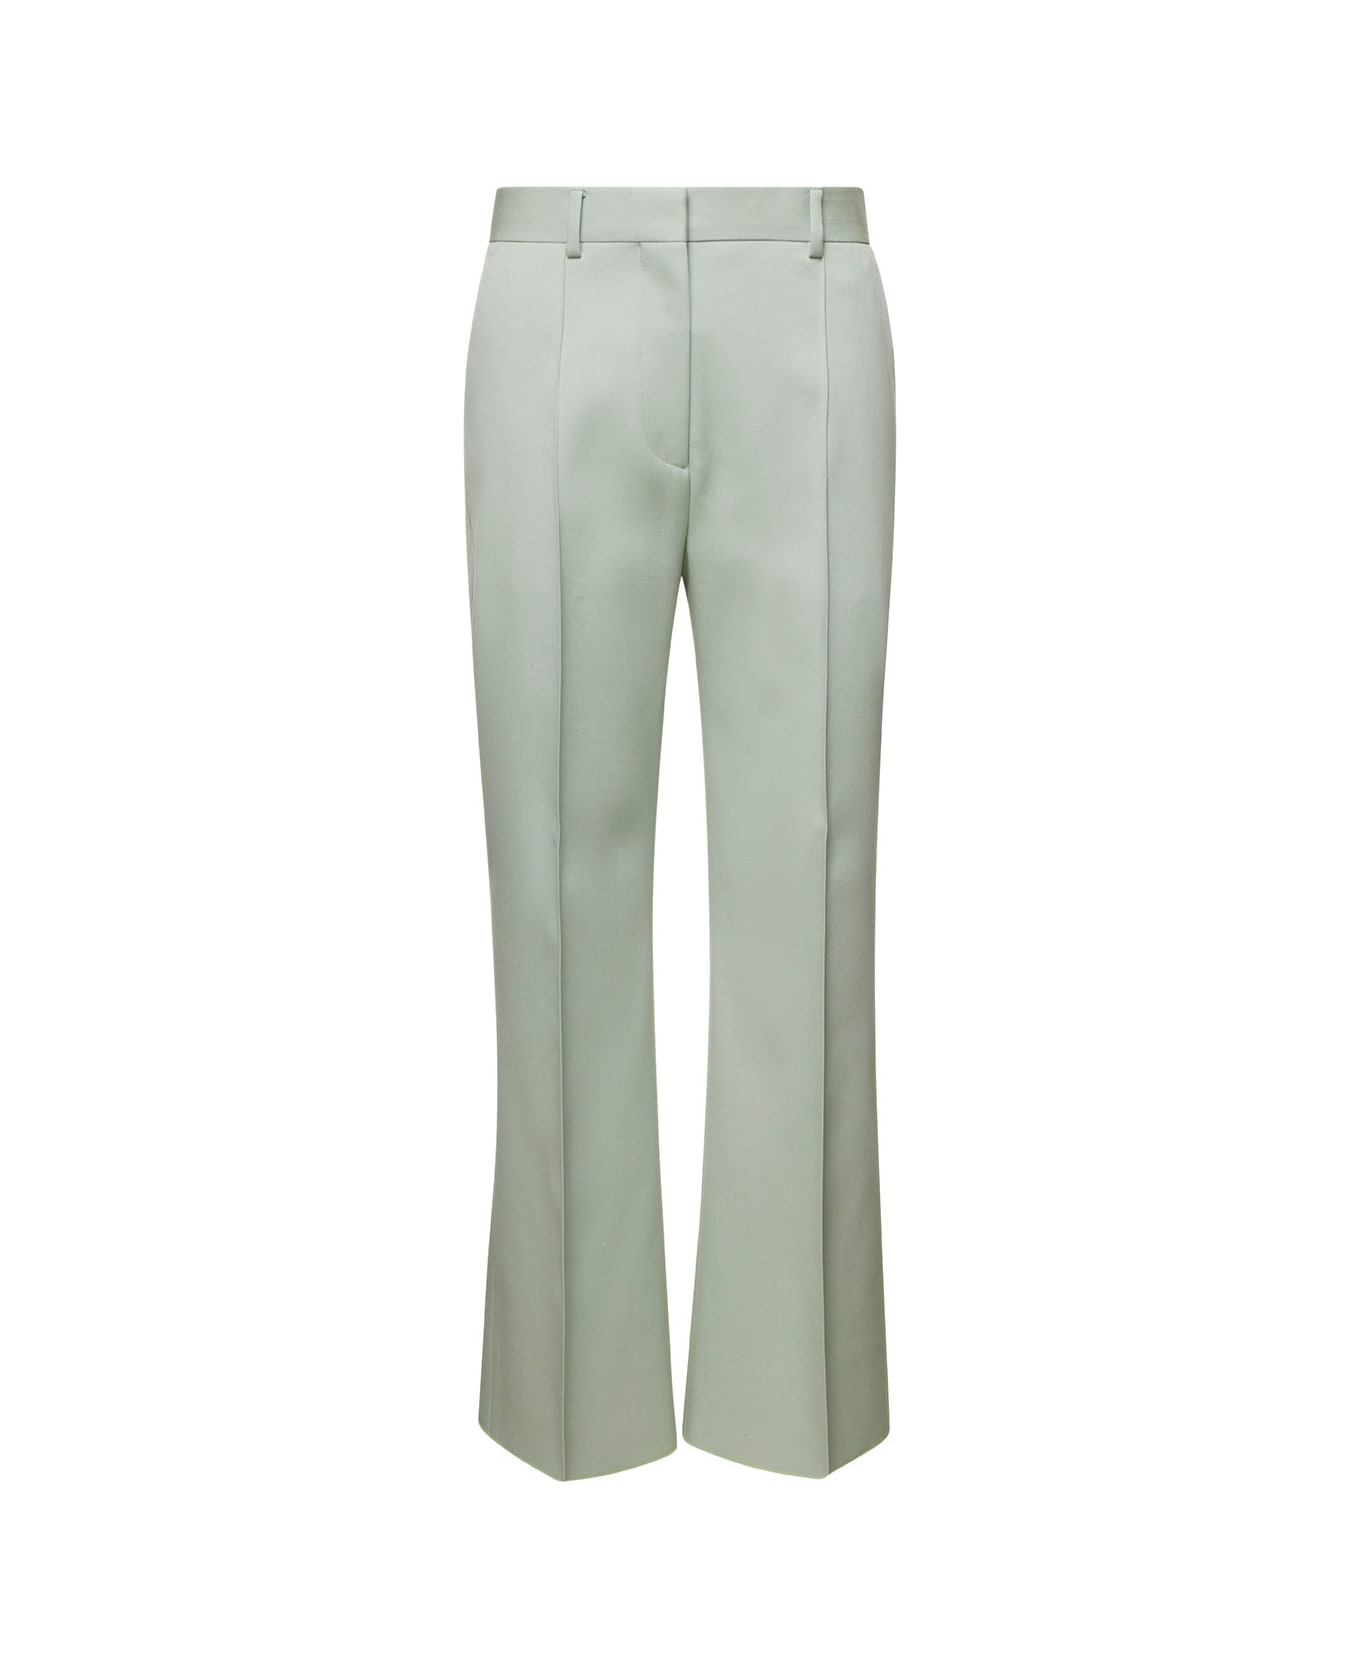 Lanvin Flared Tailored Pants - GREEN ボトムス